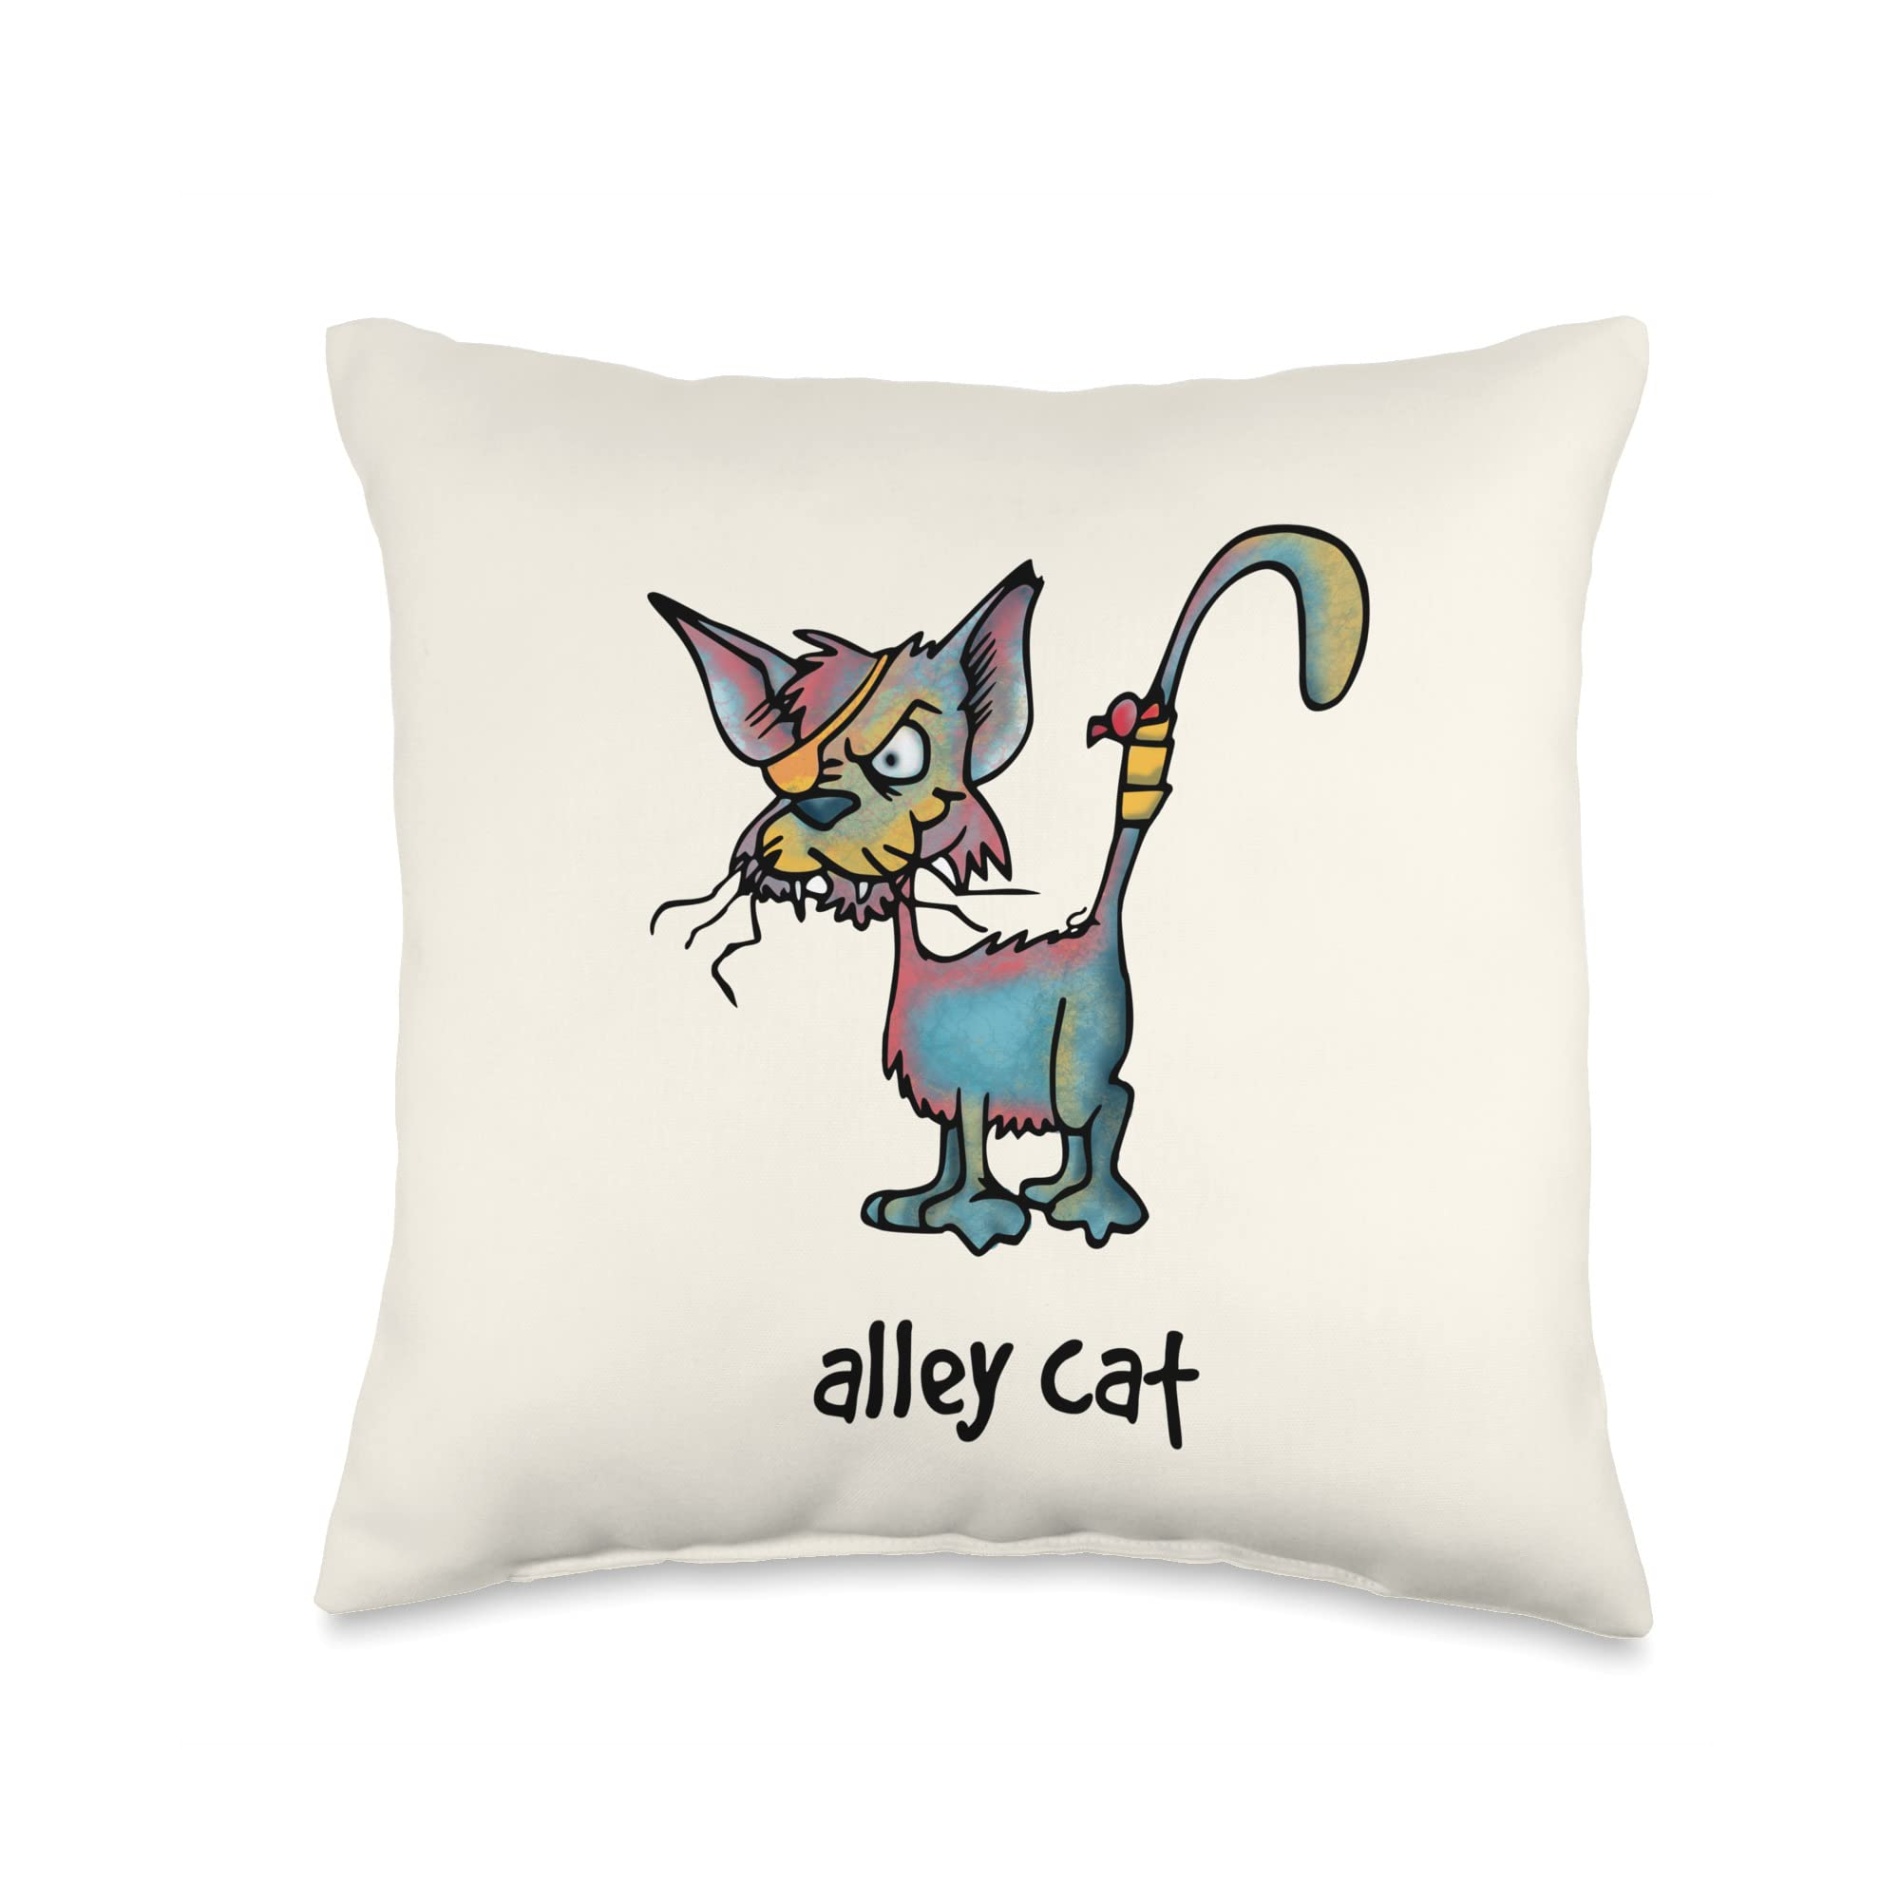 alley cat designs Bulan 5 Alley Cartoon-for cat Lovers with a Sense of Humor Throw Pillow, x,  Multicolor